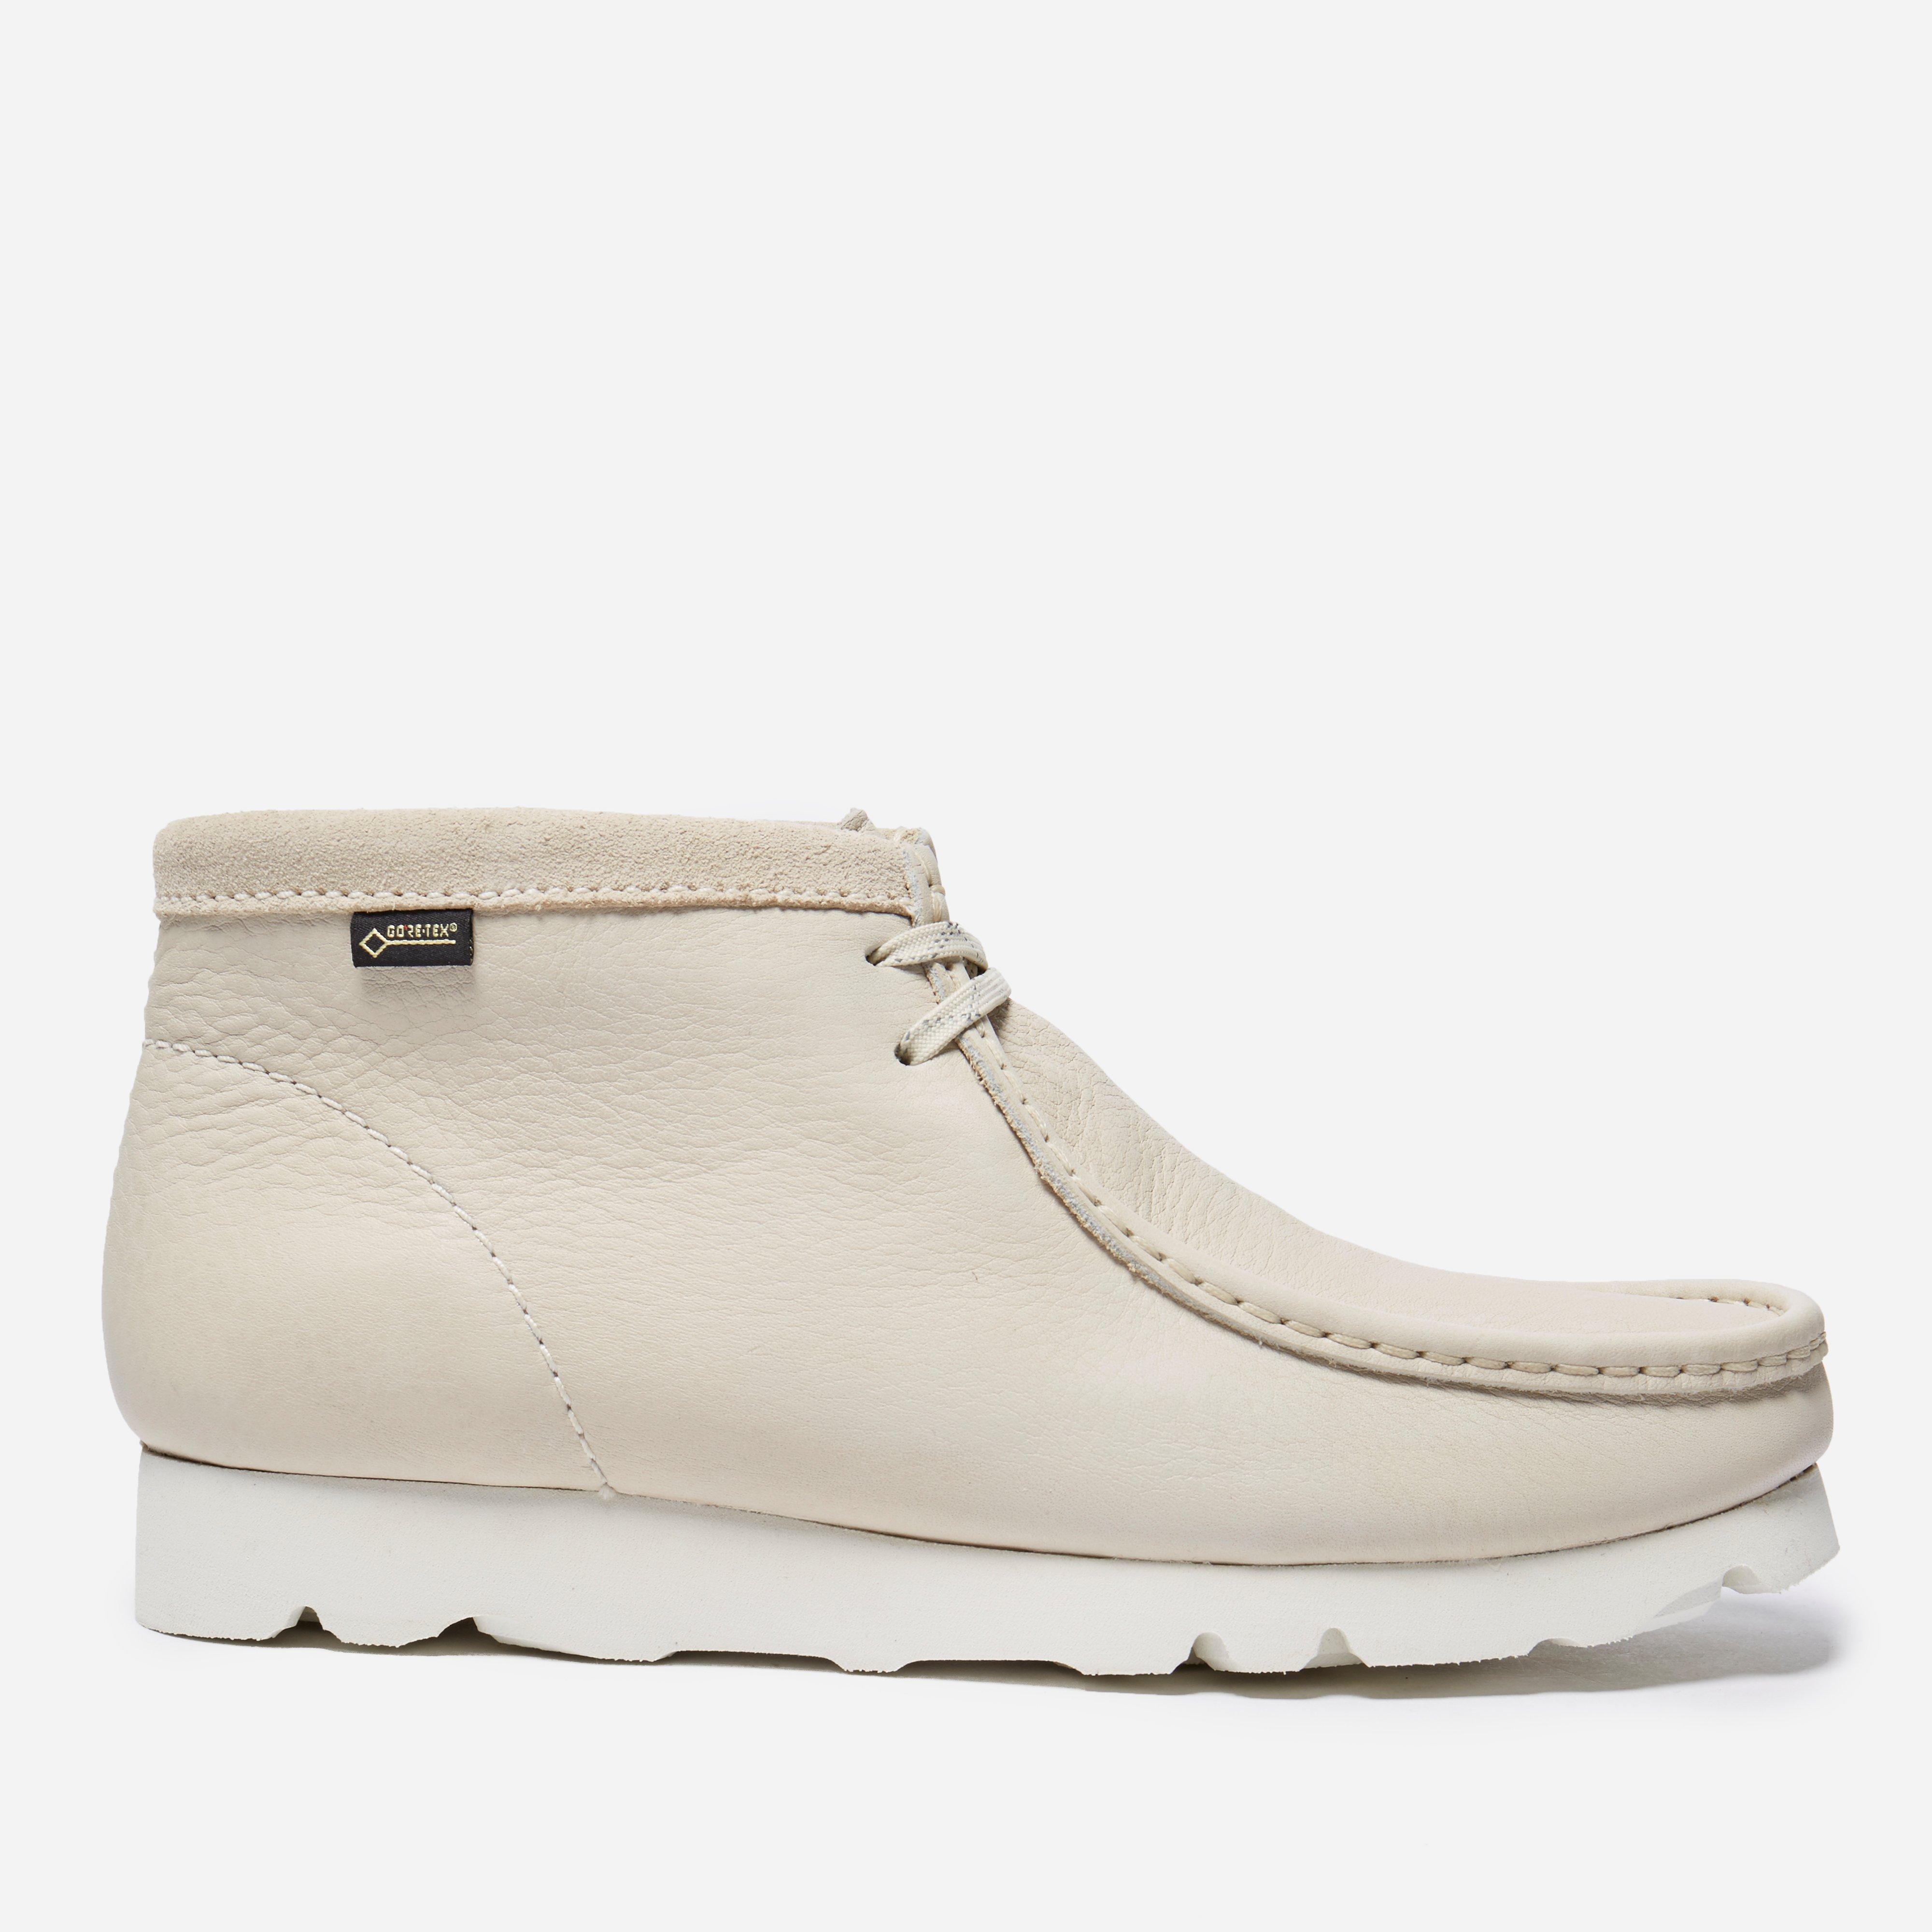 Clarks Suede Wallabee Boot Gore-tex - Off White Nubuck for Men - Lyst